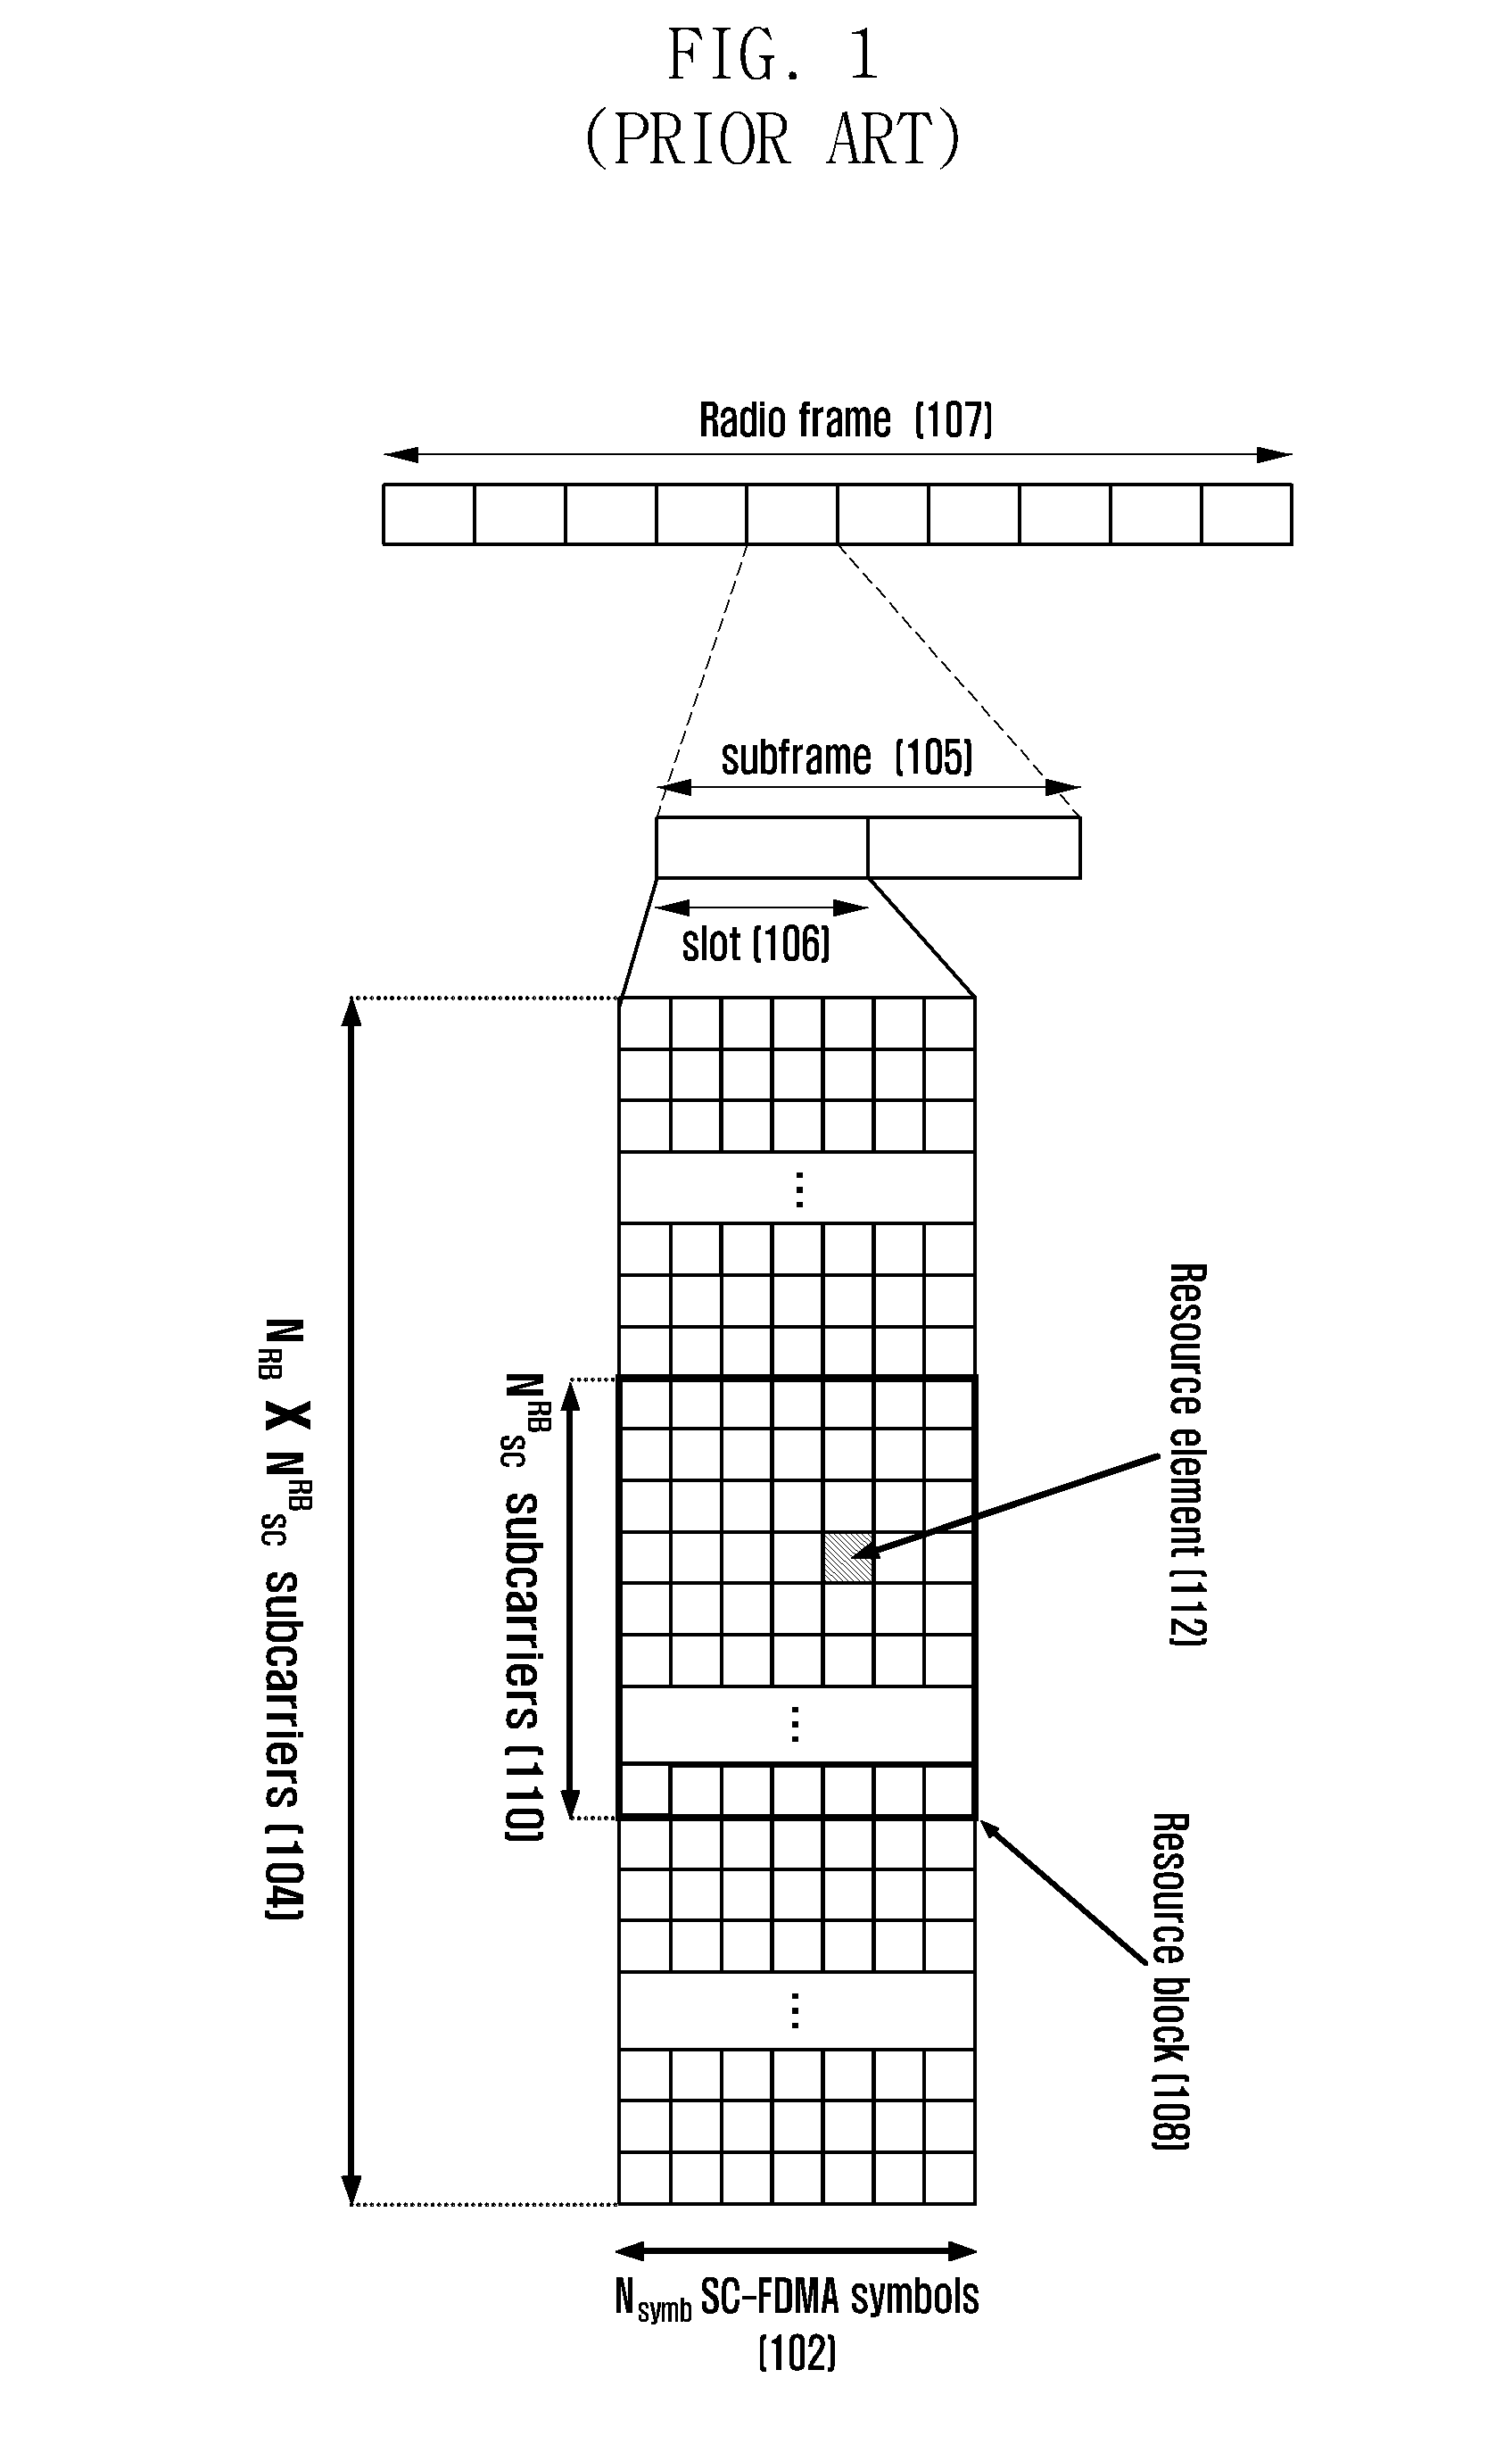 Uplink control information transmission method and apparatus for use in cellular mobile communication system